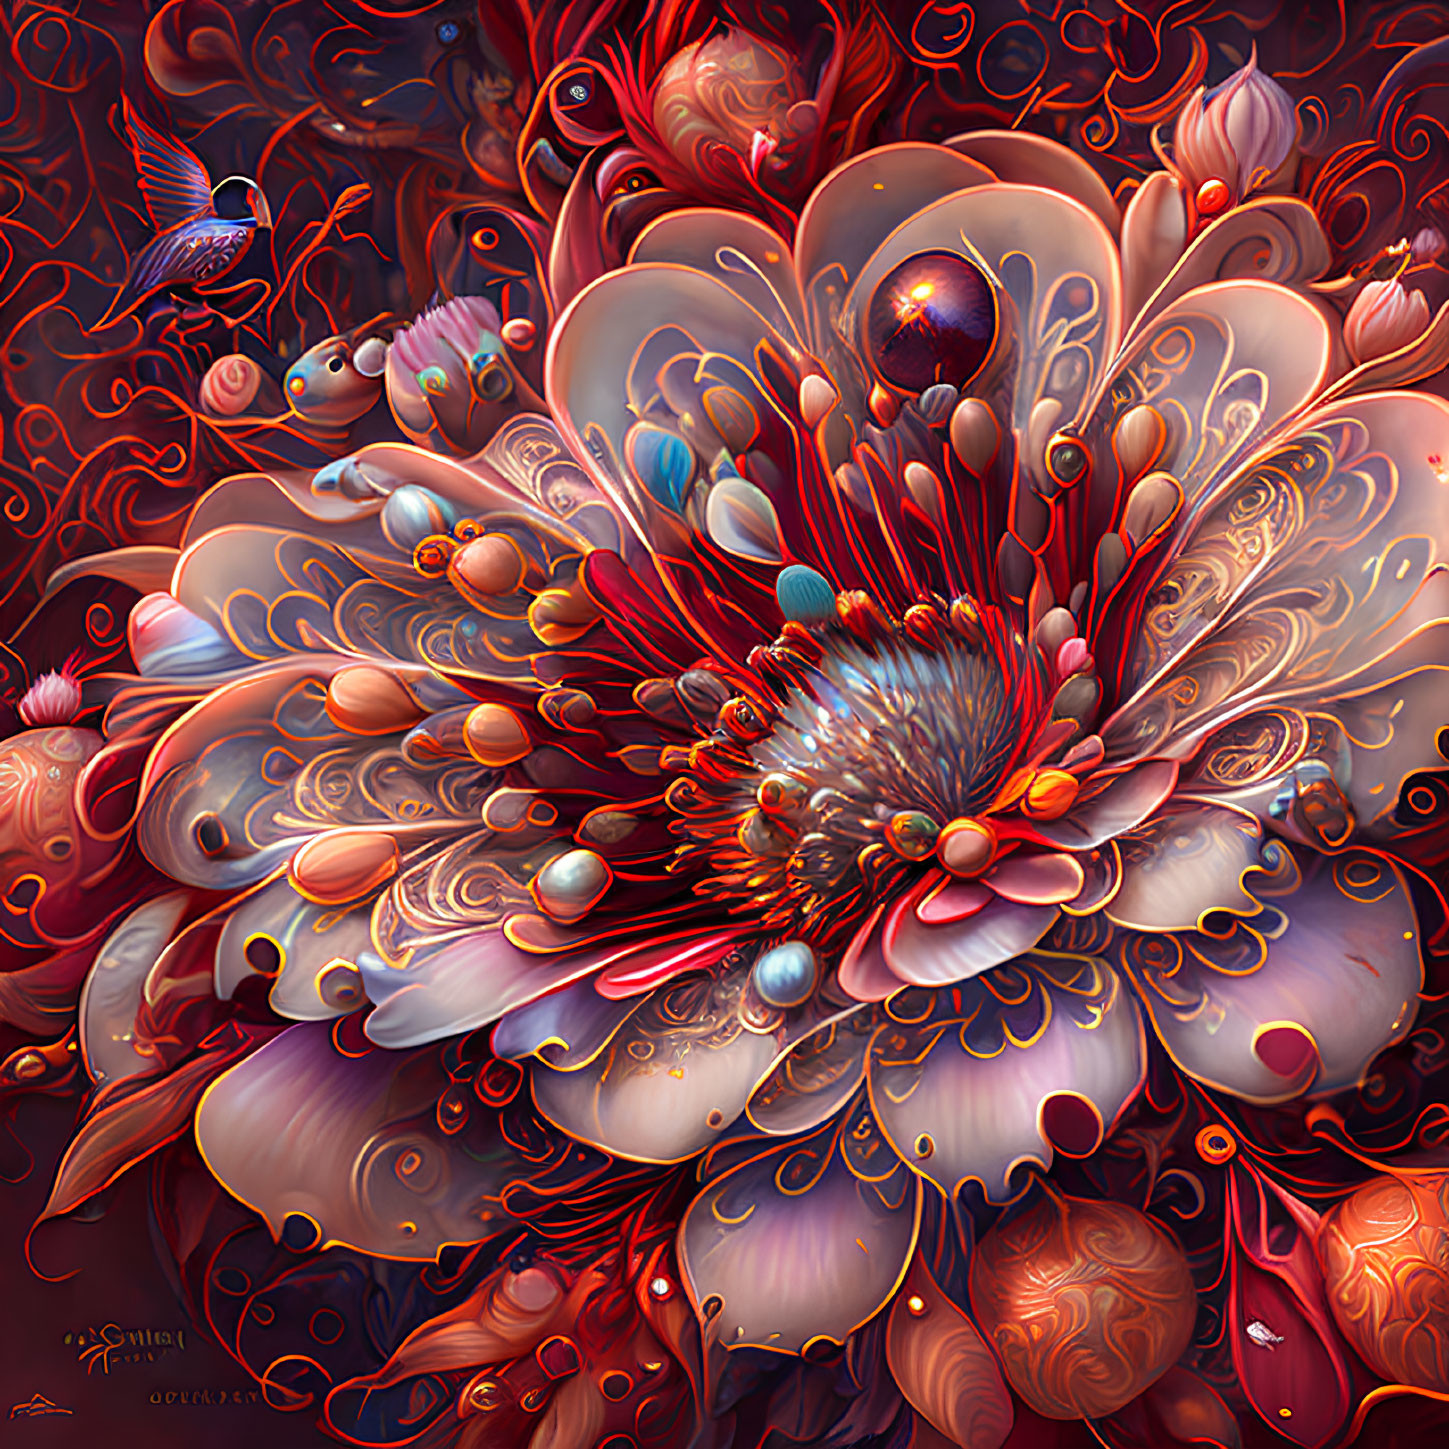 Vibrant oversized flower with red and pink petals, whimsical creatures, and ornate patterns